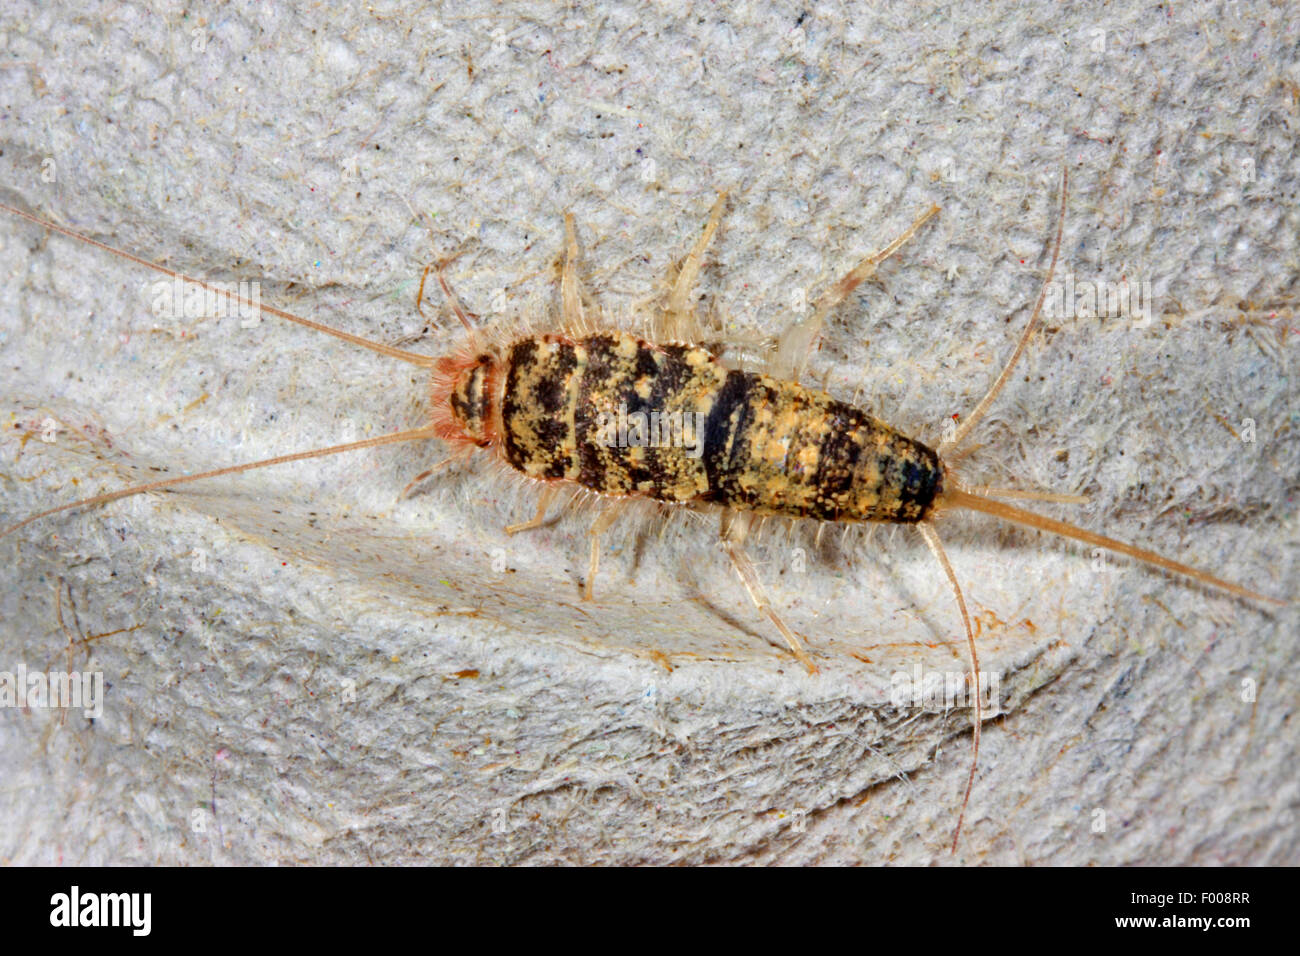 Firebrat (Thermobia domestica, Thermophila furnorum, Lepismodes inquilinus), on a rag, Germany Stock Photo